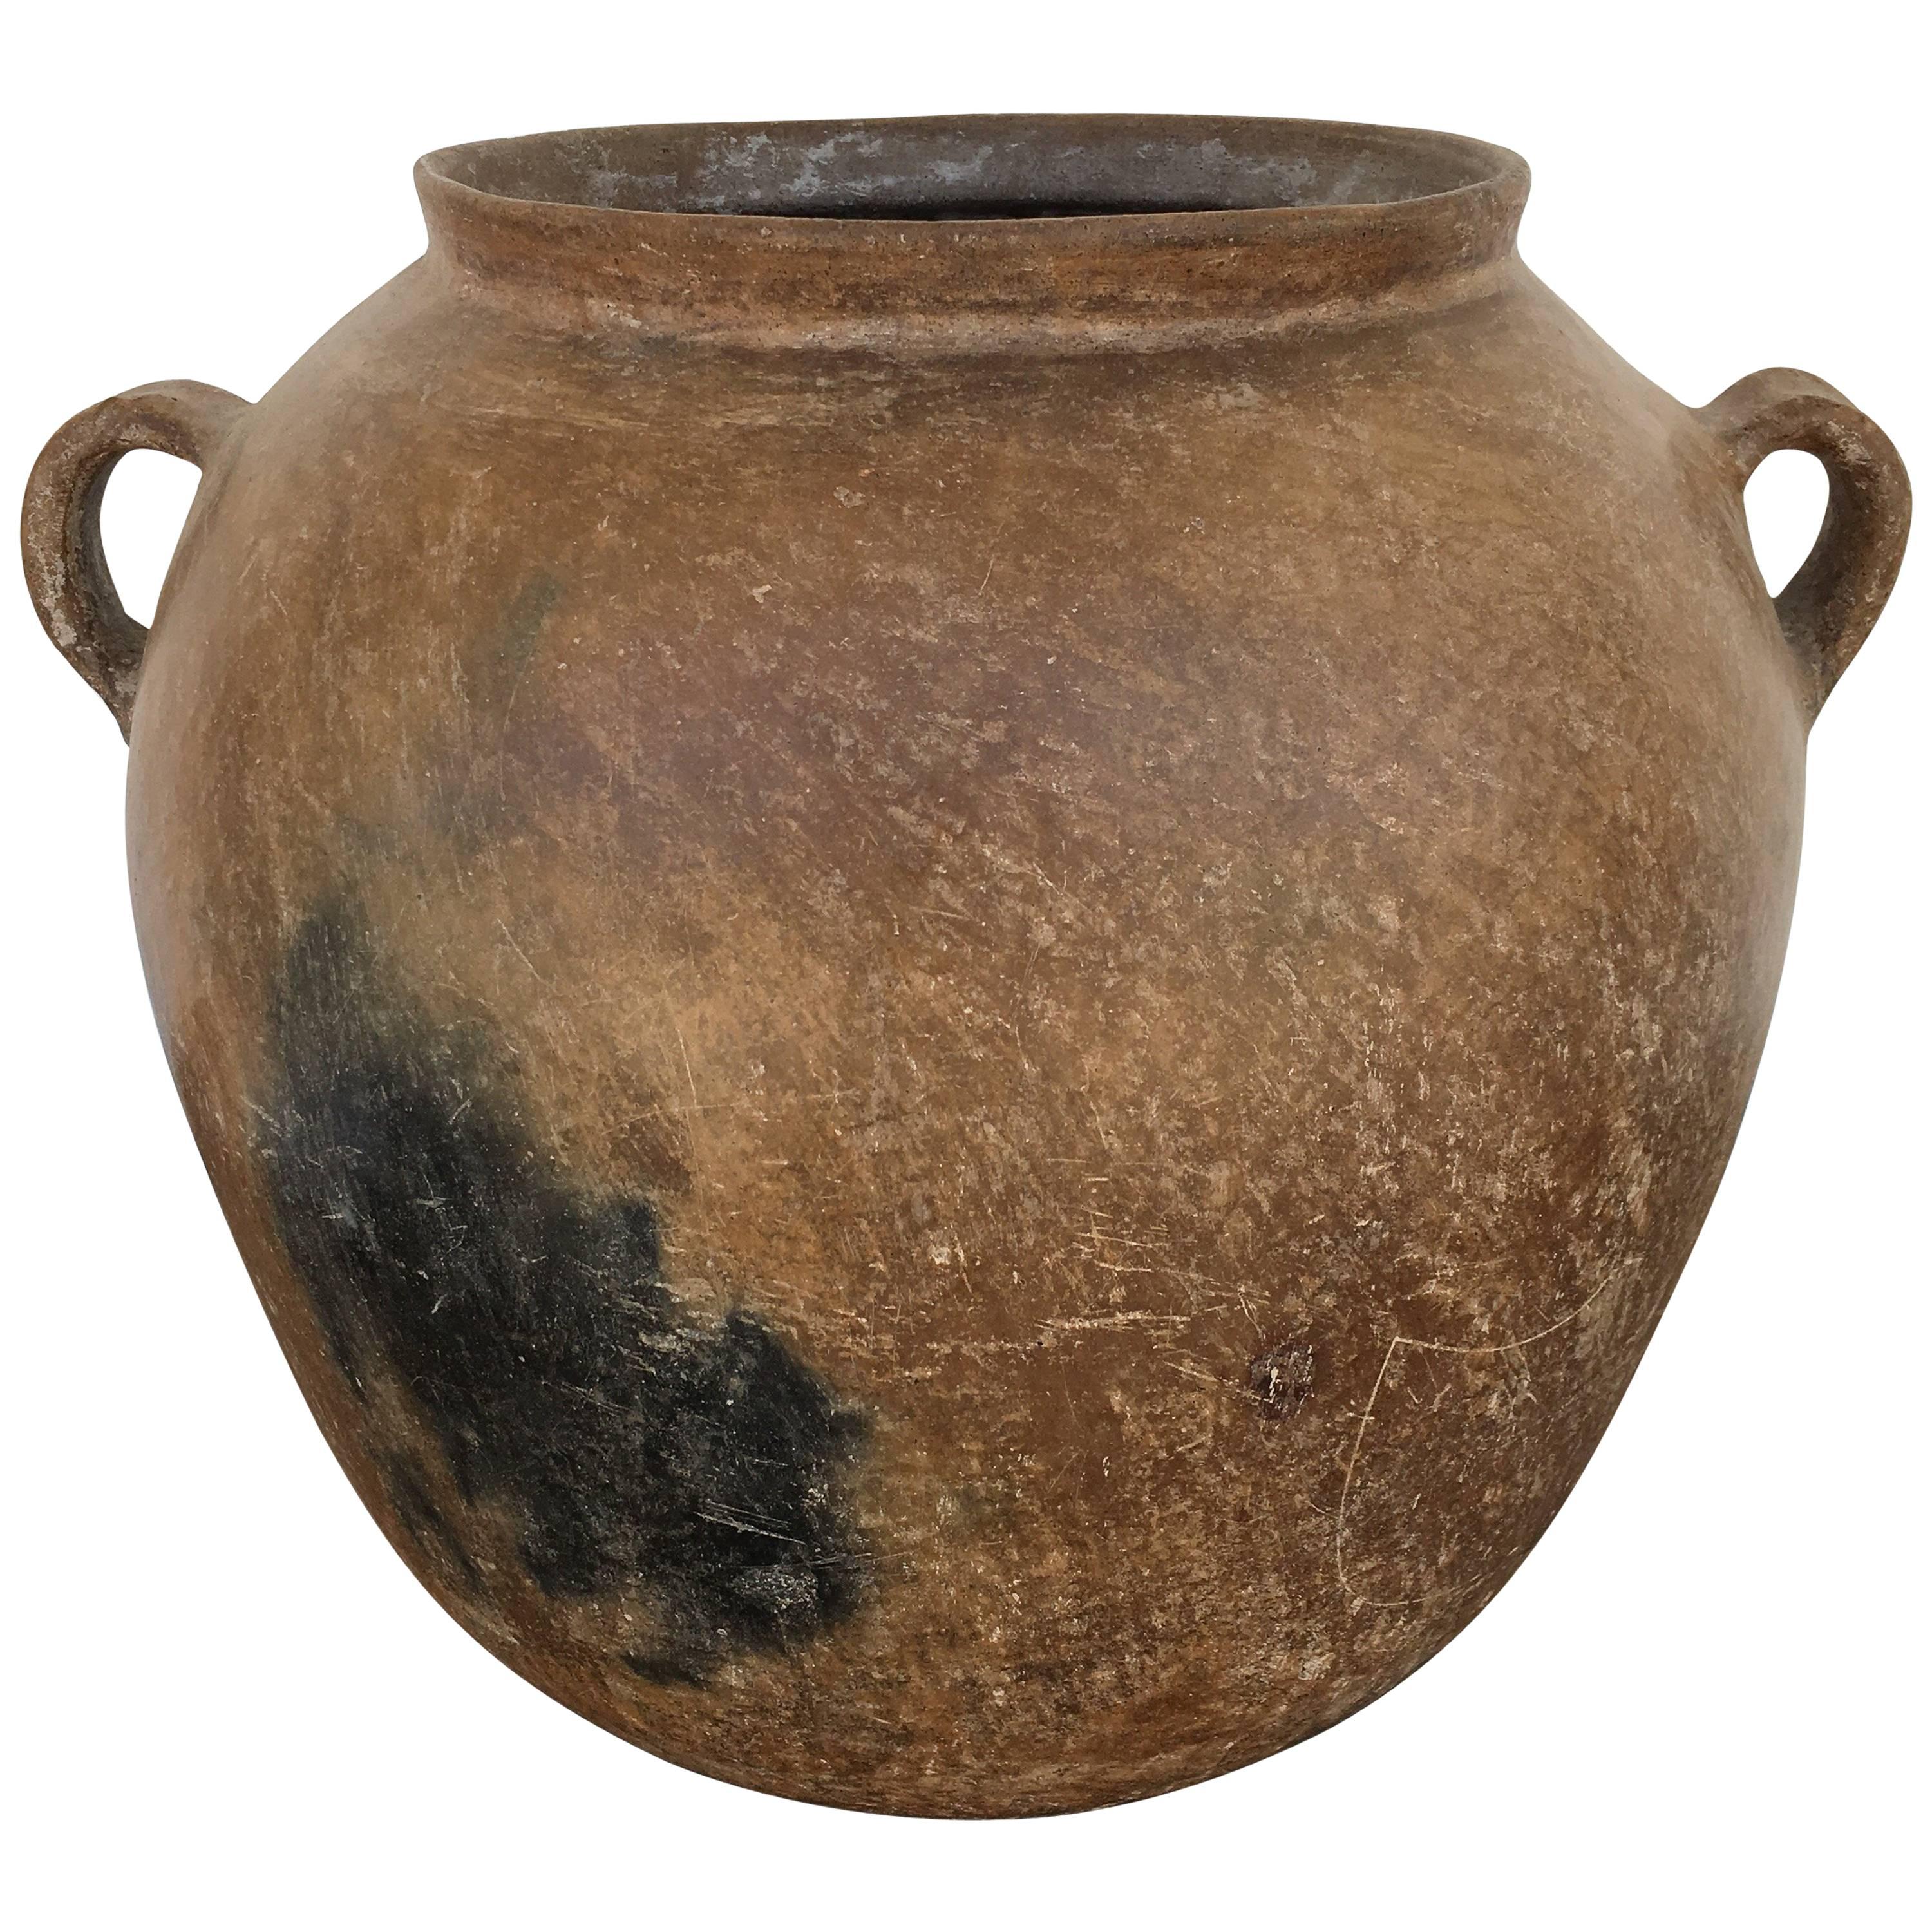 Terracota Pot from Mexico